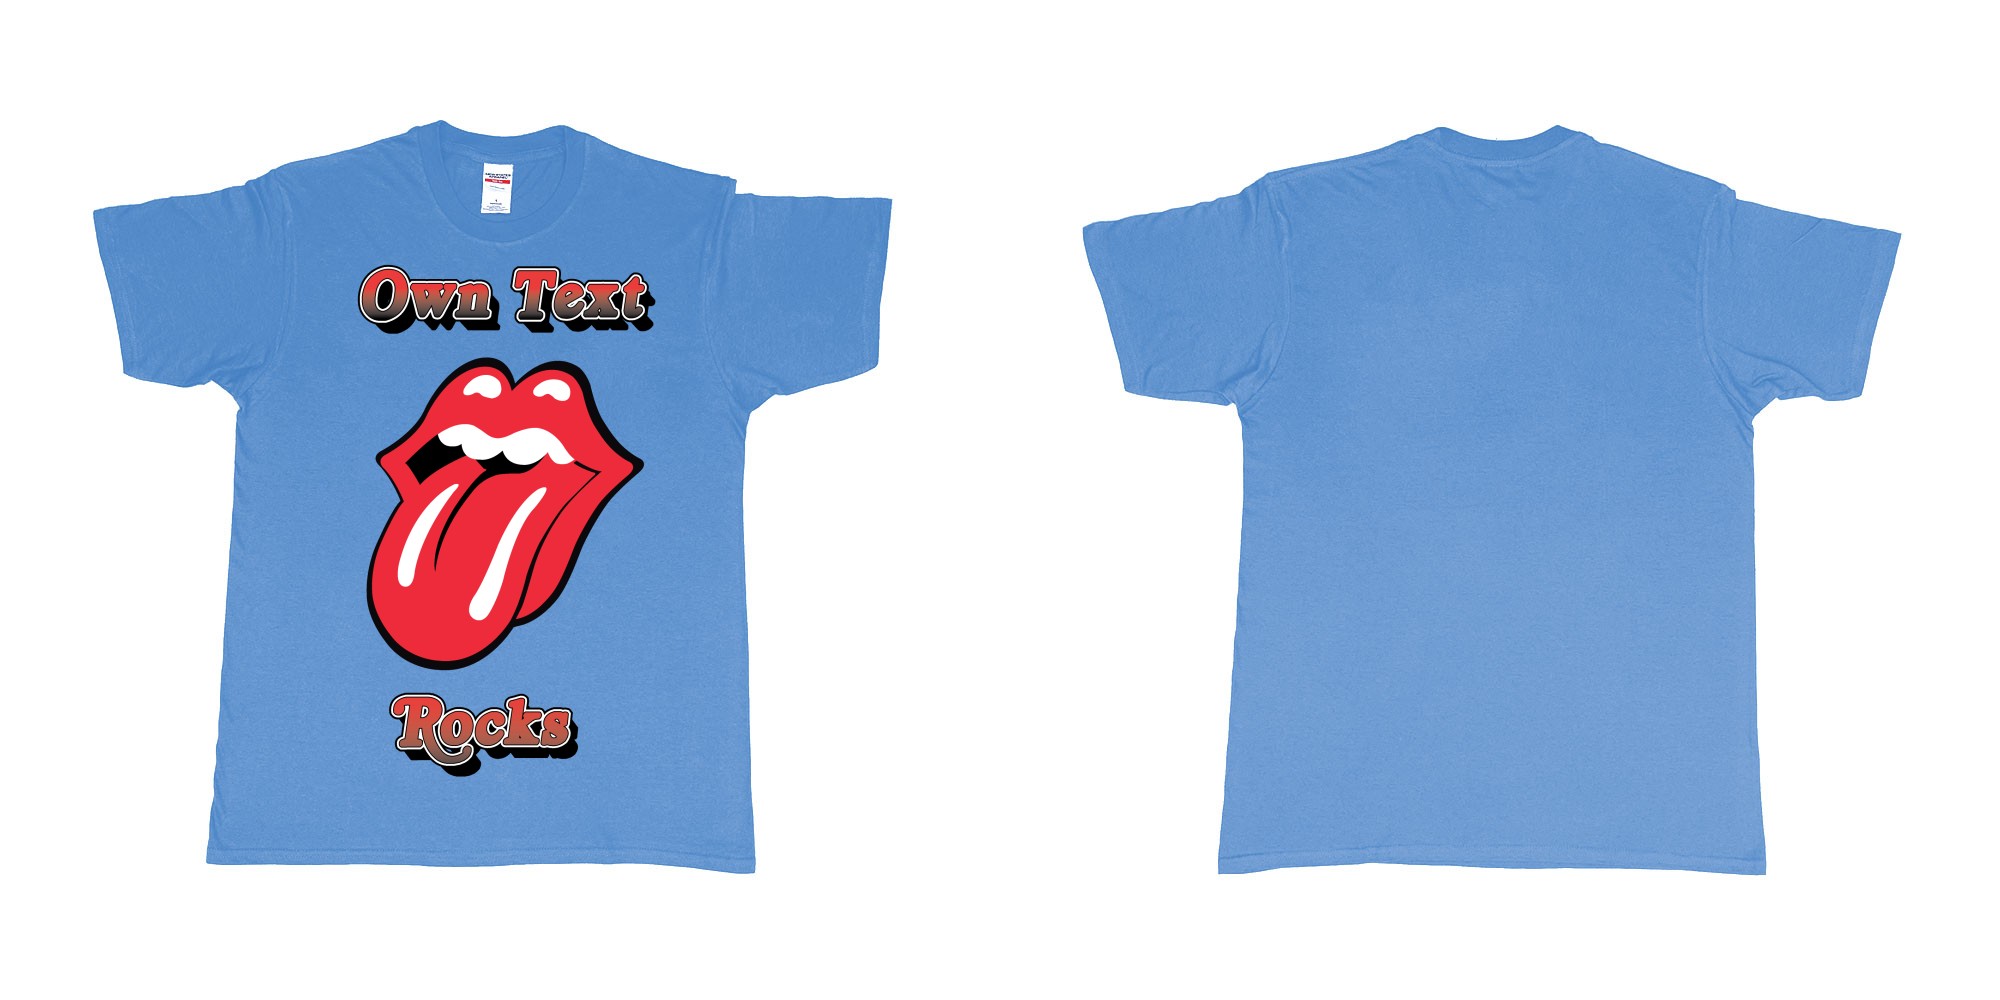 Custom tshirt design own custom text rocks rolling stones logo red tongue and lips print bali in fabric color carolina-blue choice your own text made in Bali by The Pirate Way